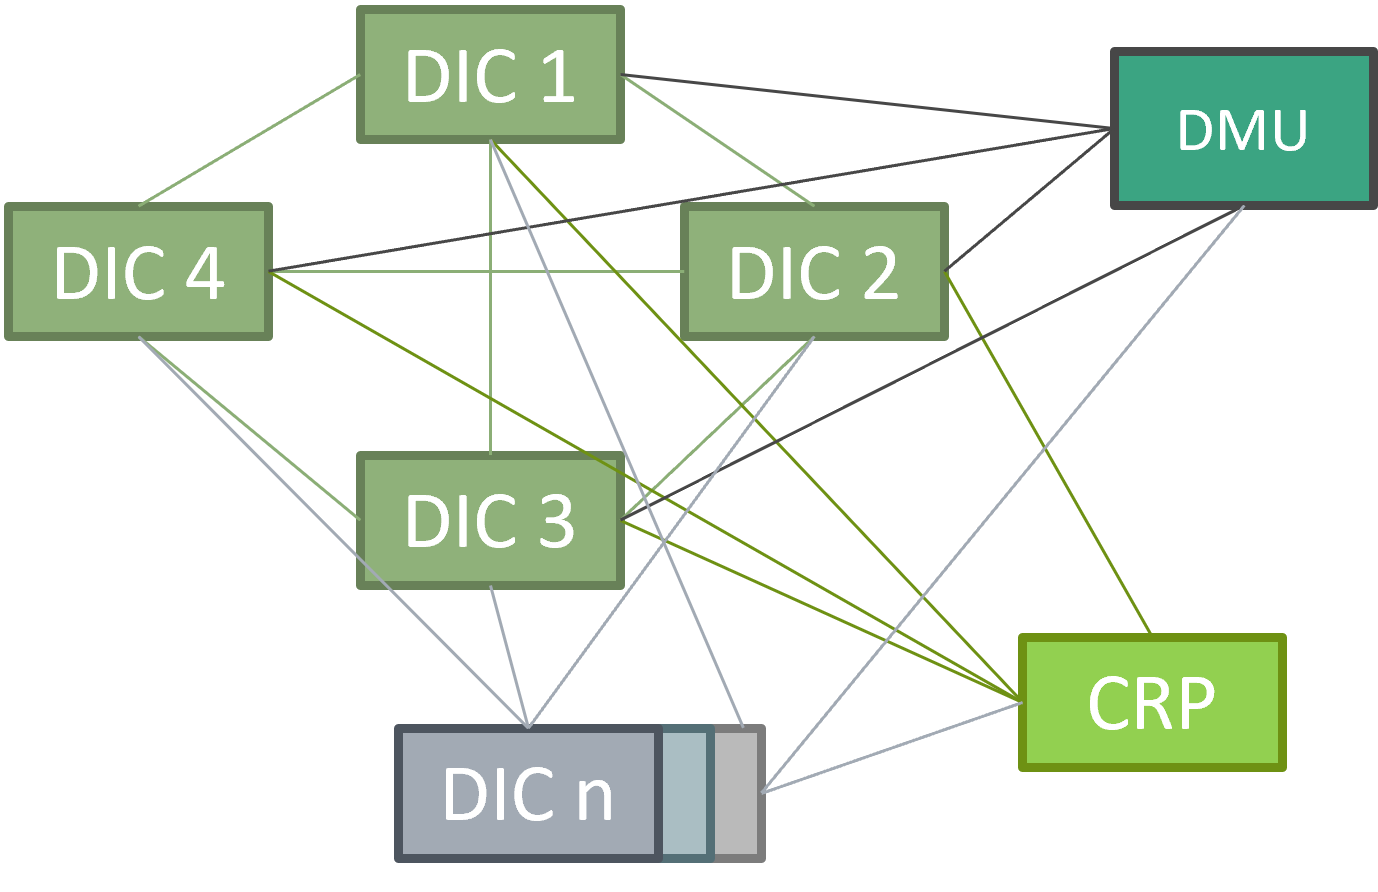 Federated data exchange between distributed DICs (CRP=Central Research Portal, DMU=Data Management Unit)